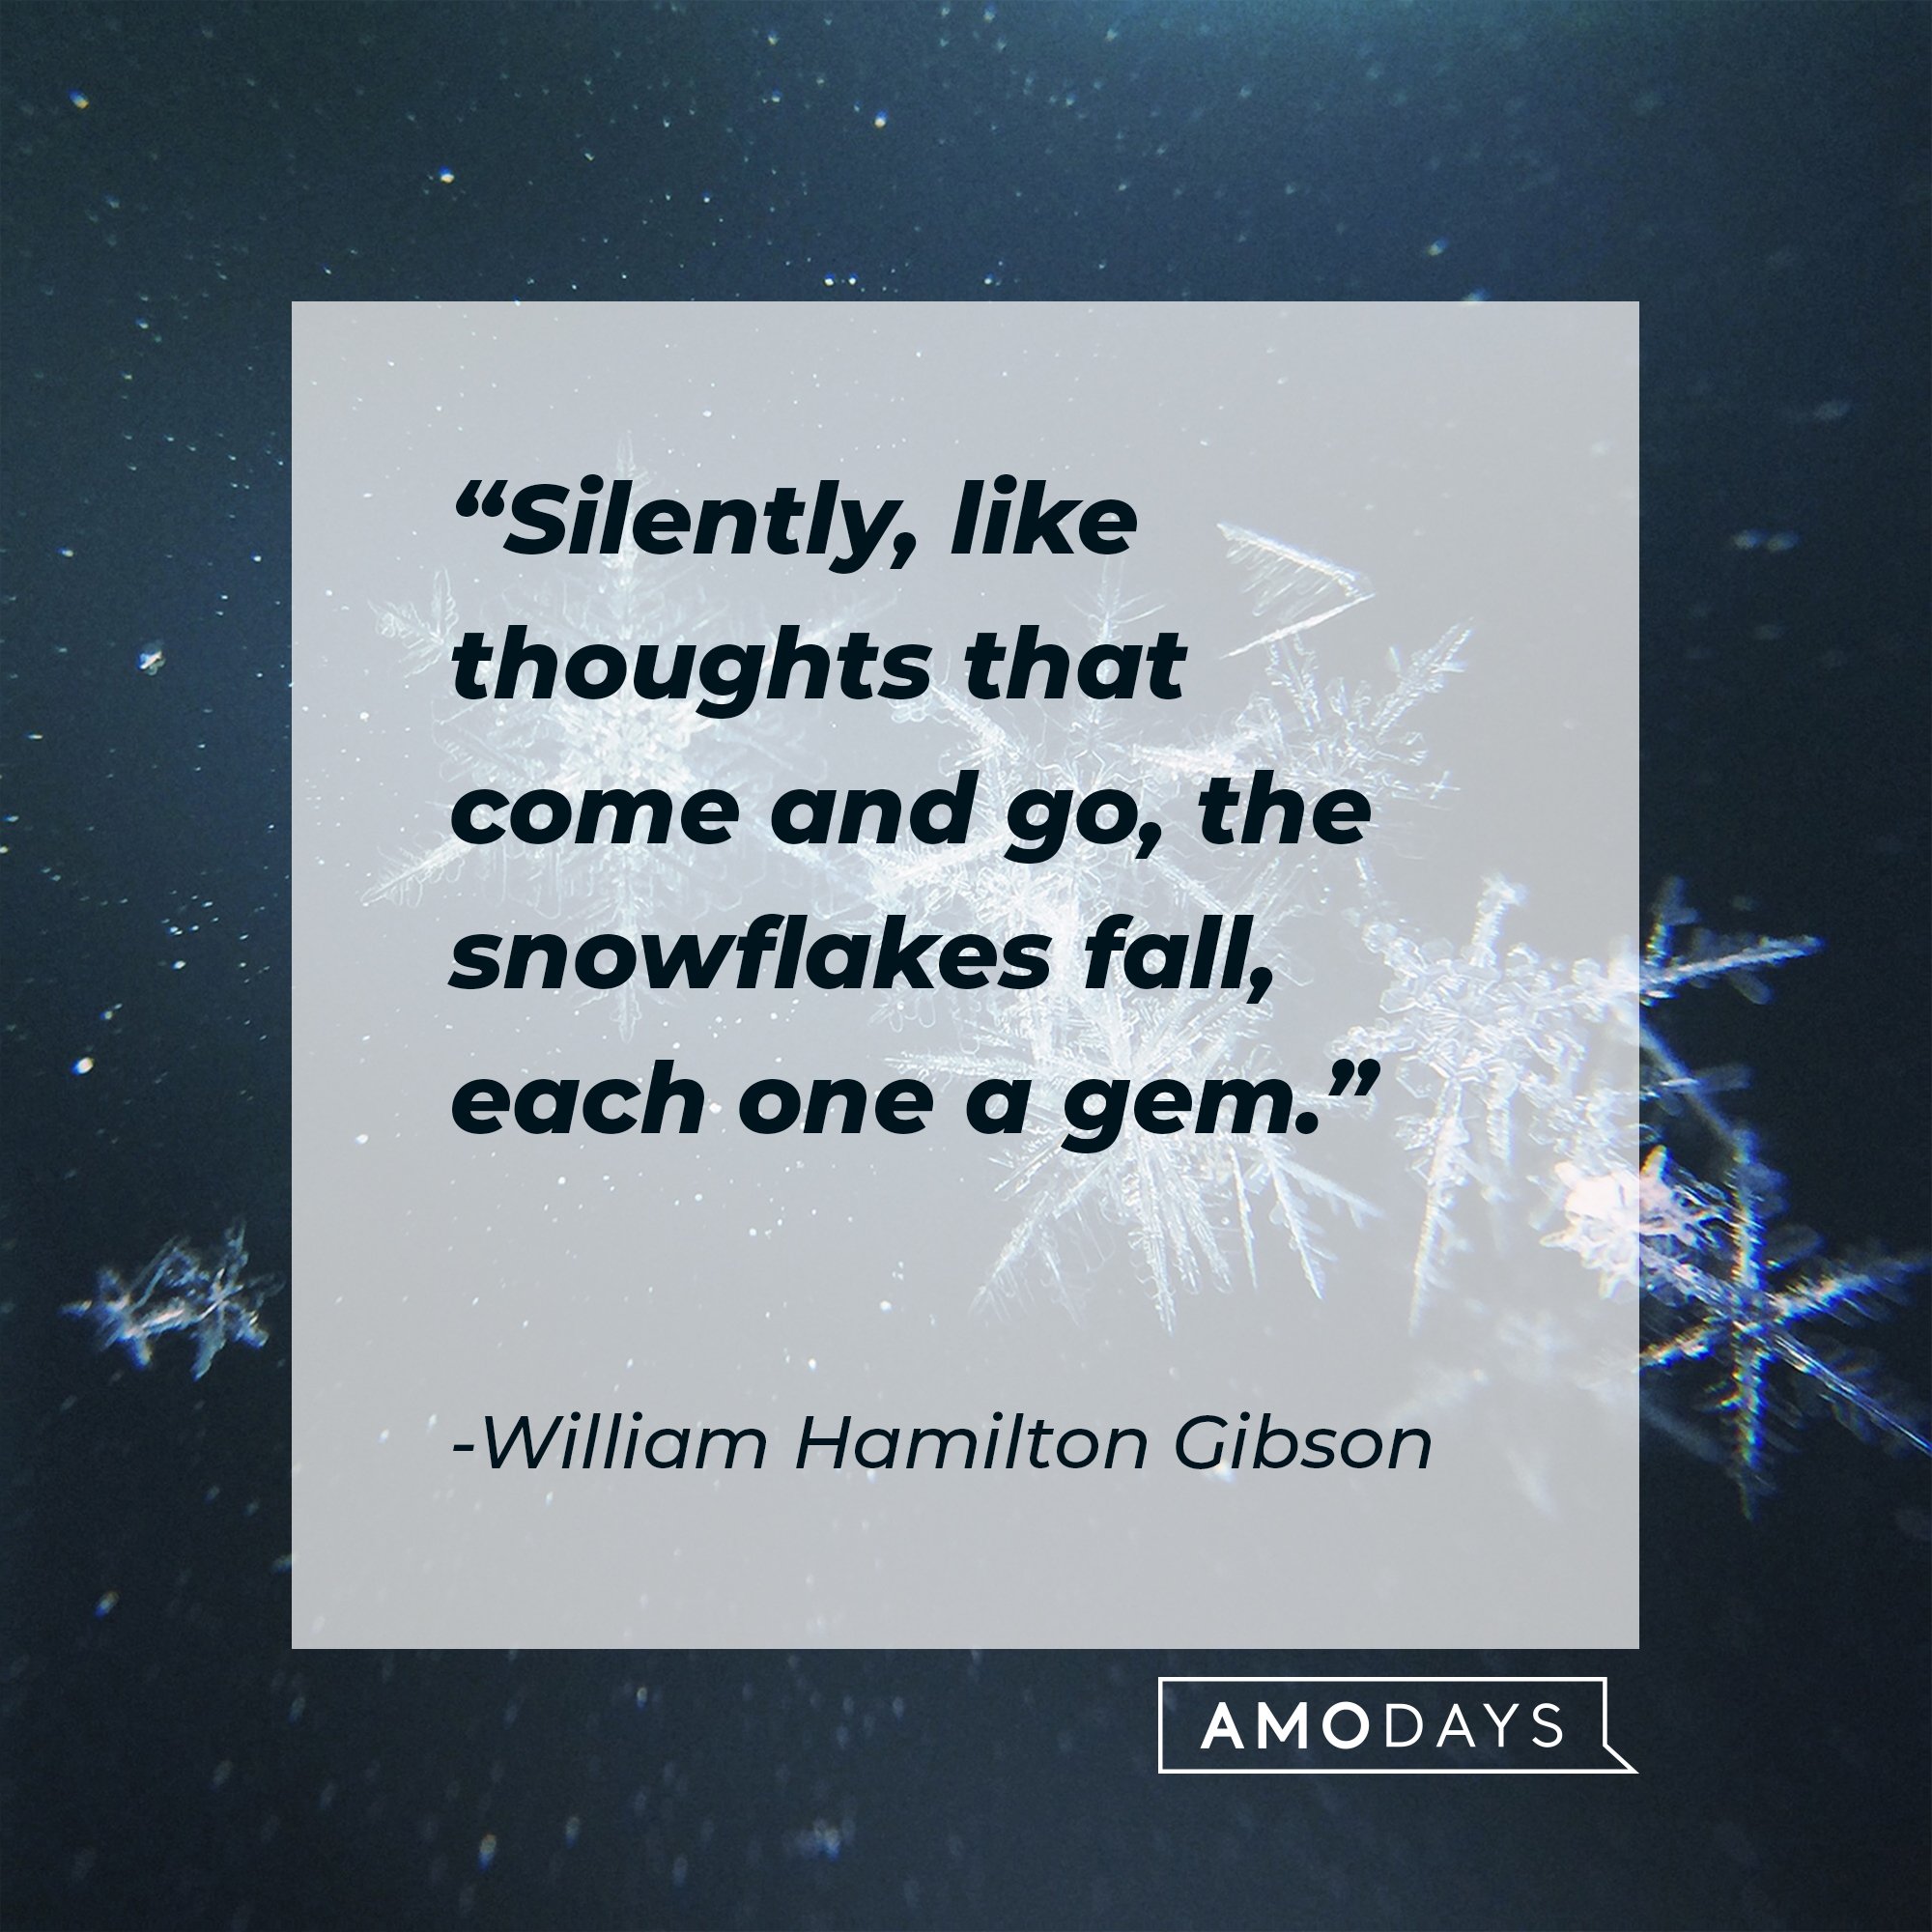  William Hamilton Gibson's quote: "Silently, like thoughts that come and go, the snowflakes fall, each one a gem." | Image: AmoDays